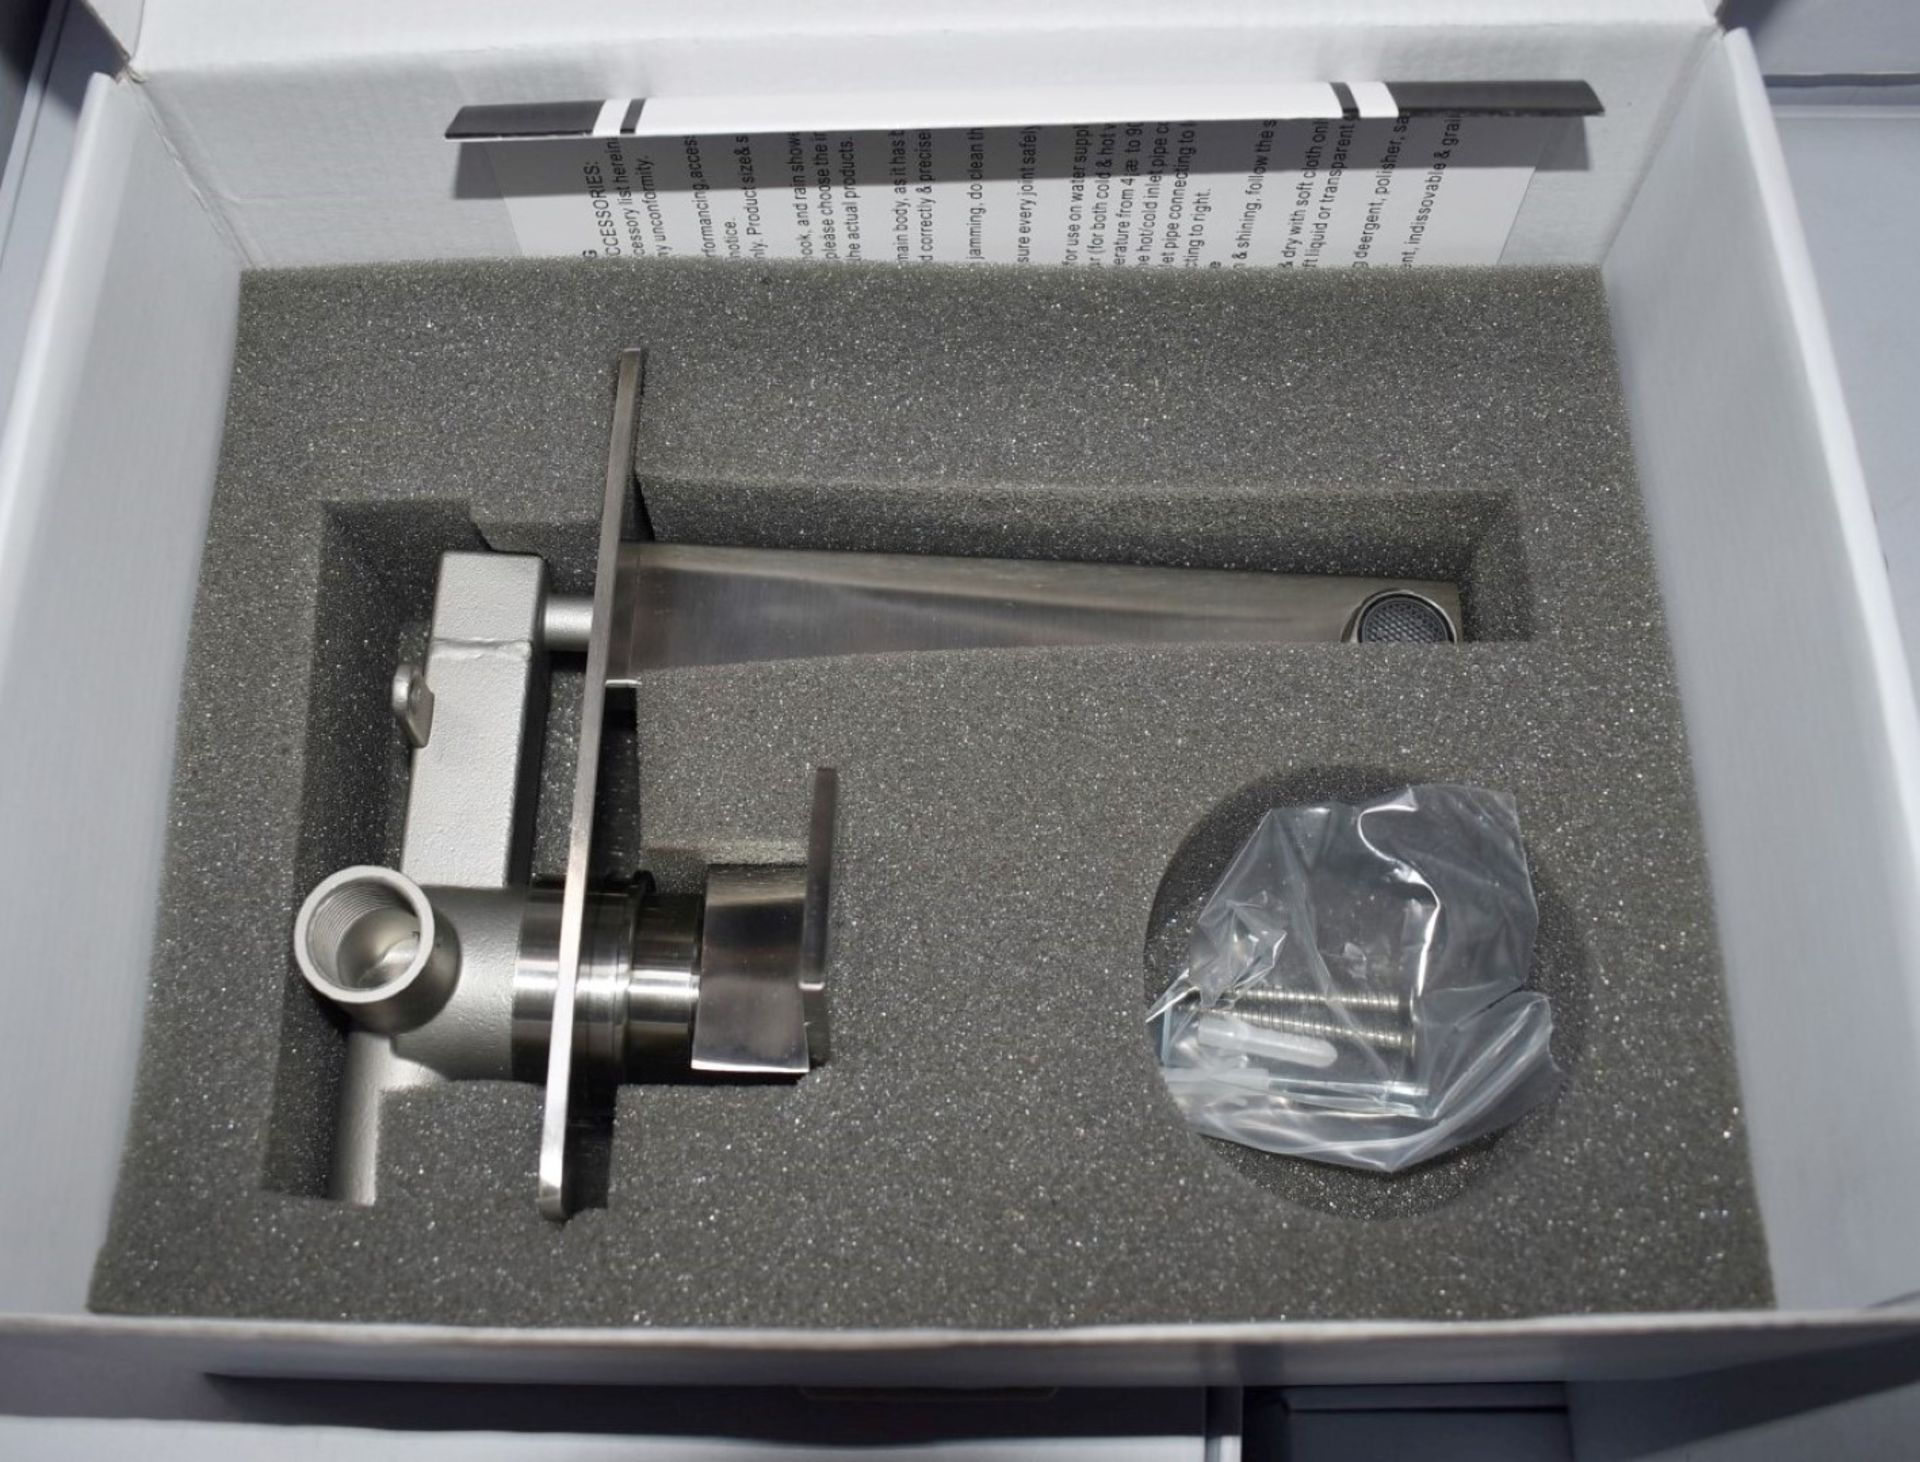 1 x Stonearth 'Metro' Stainless Steel Wall Mounted Tap - Brand New & Boxed - RRP £345 - Ref: TP823 - Image 3 of 4